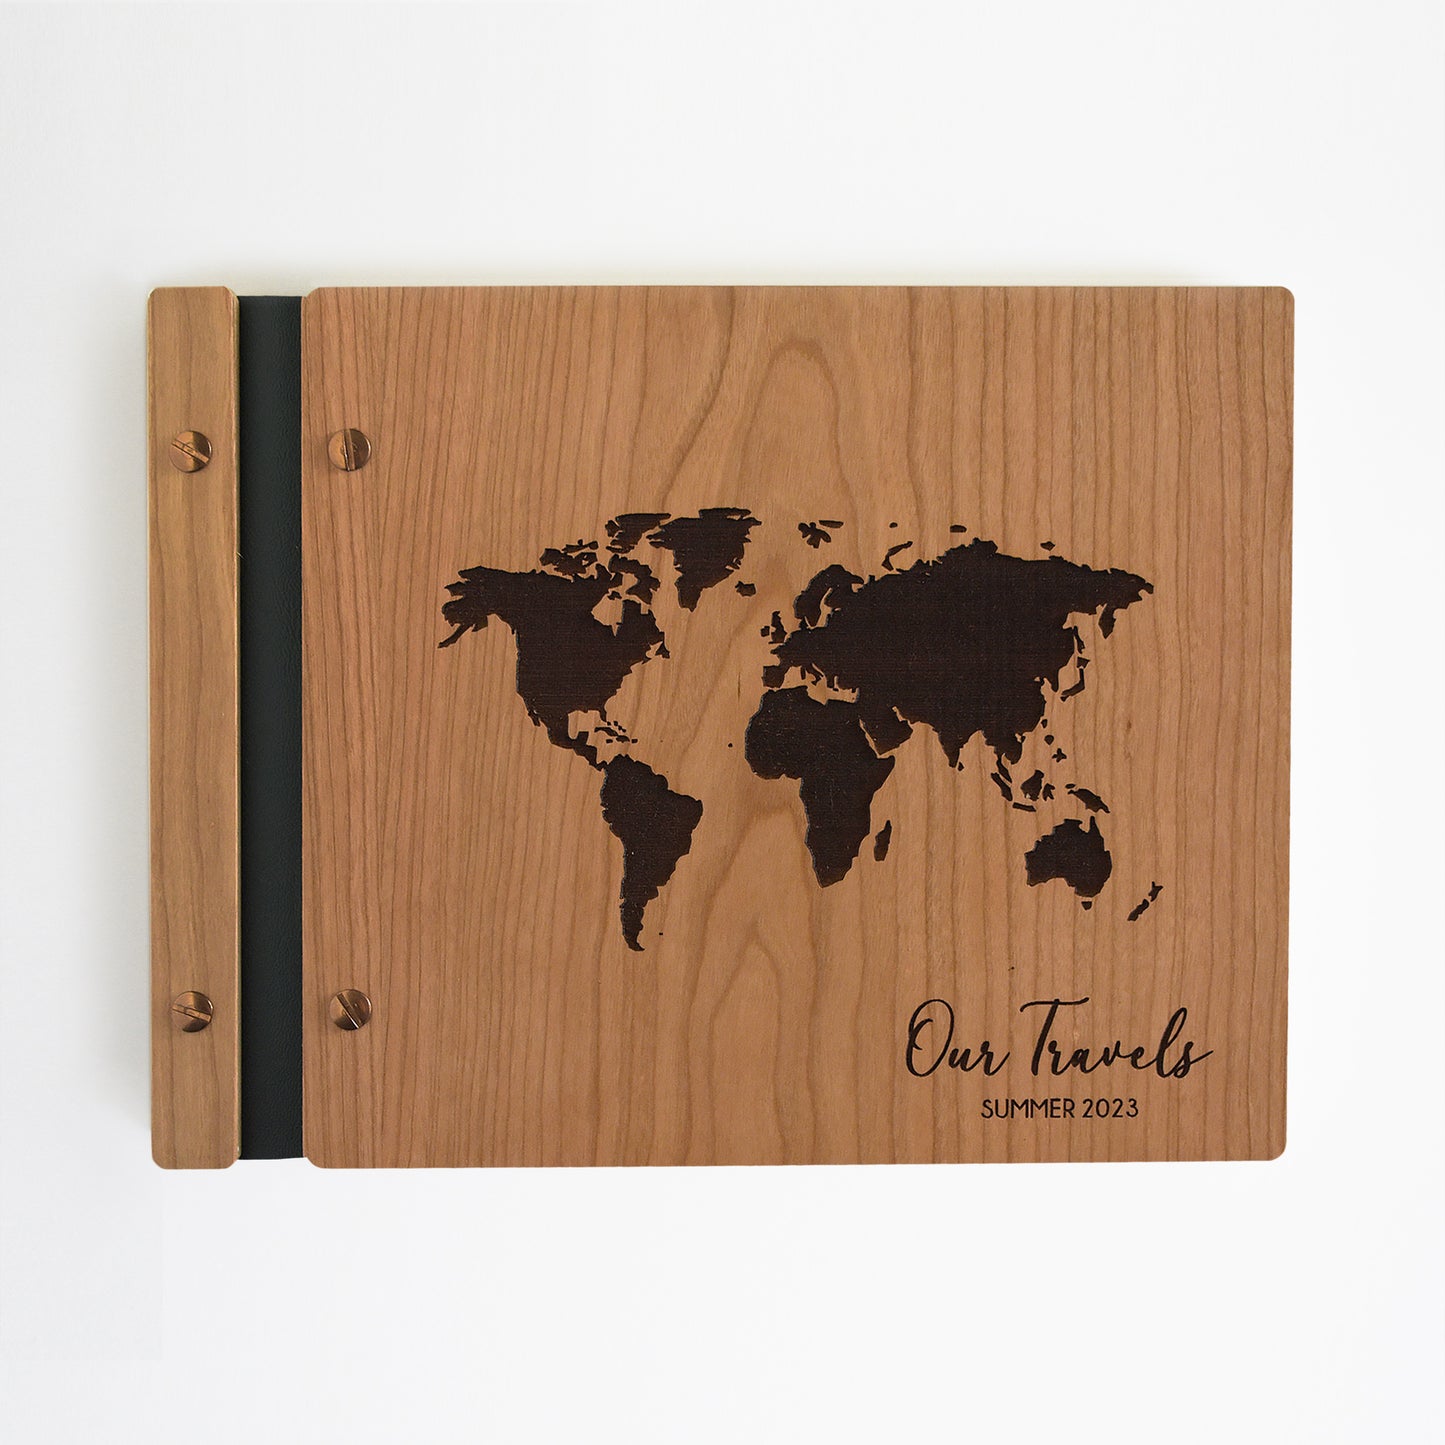 An 8.5x11" guest book lies on a table. Made of cherry wood, black vegan leather binding, and copper hardware. The front cover has en engraved world map and reads Our Travels, Summer 2023.